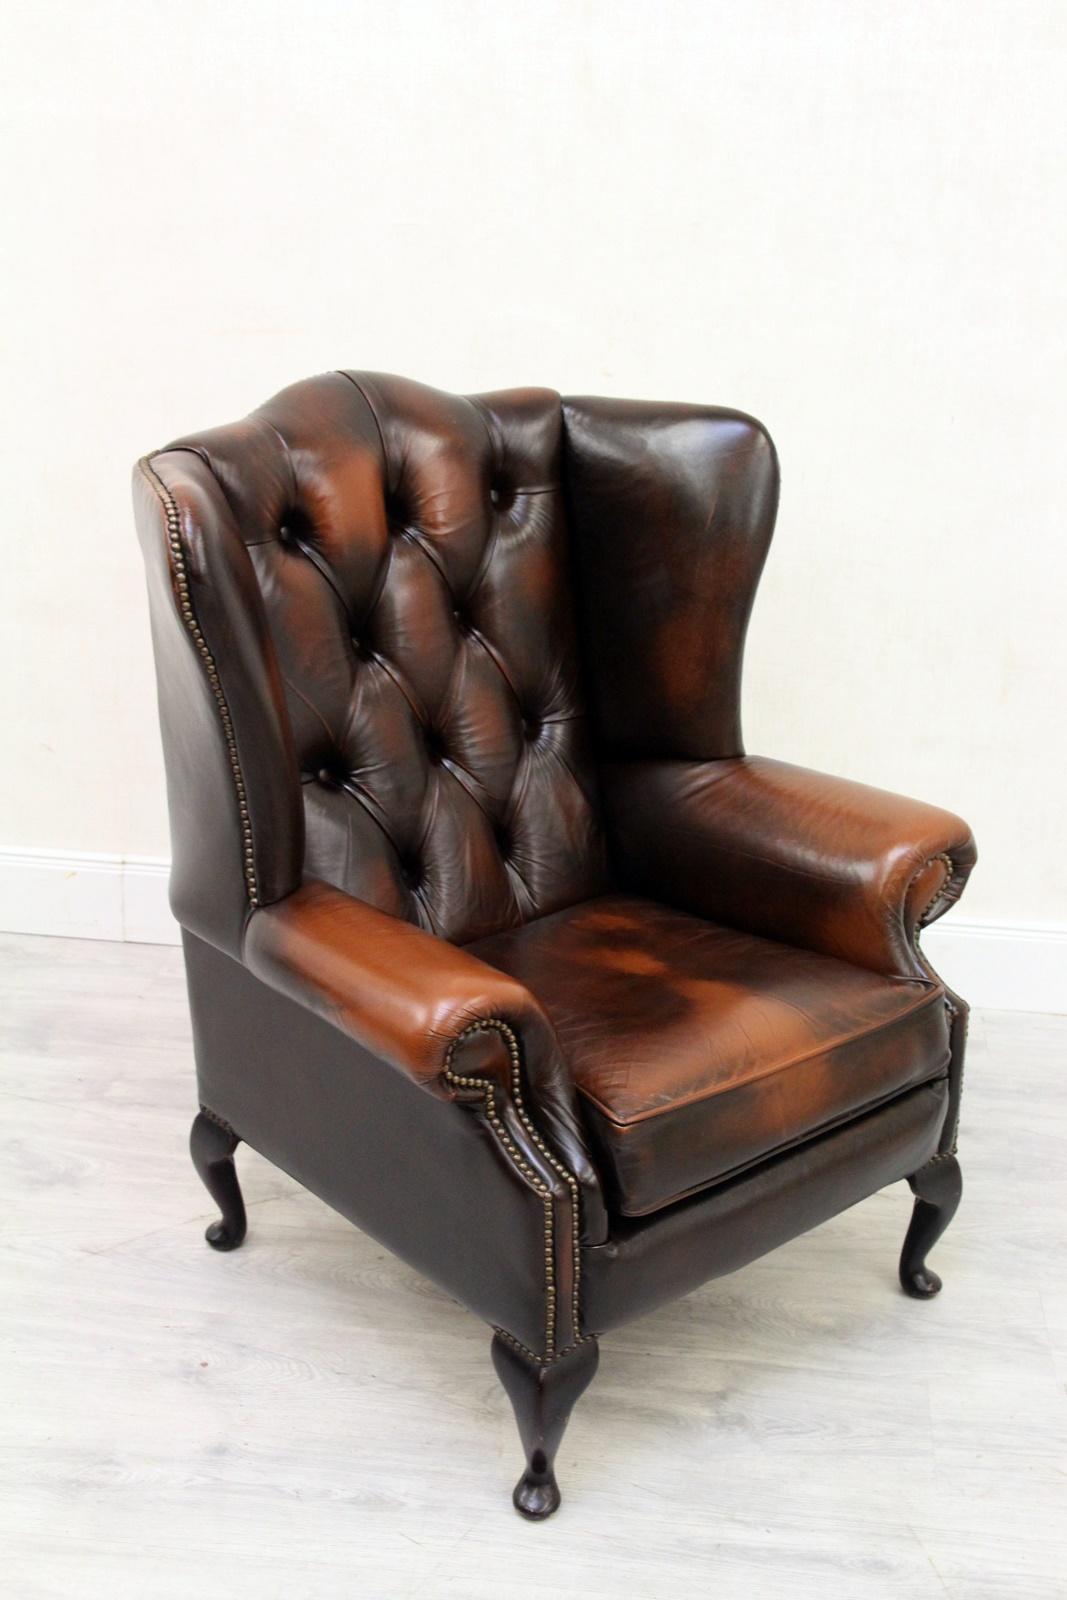 Late 20th Century Chesterfield Wing Chair Armchair Recliner Antique